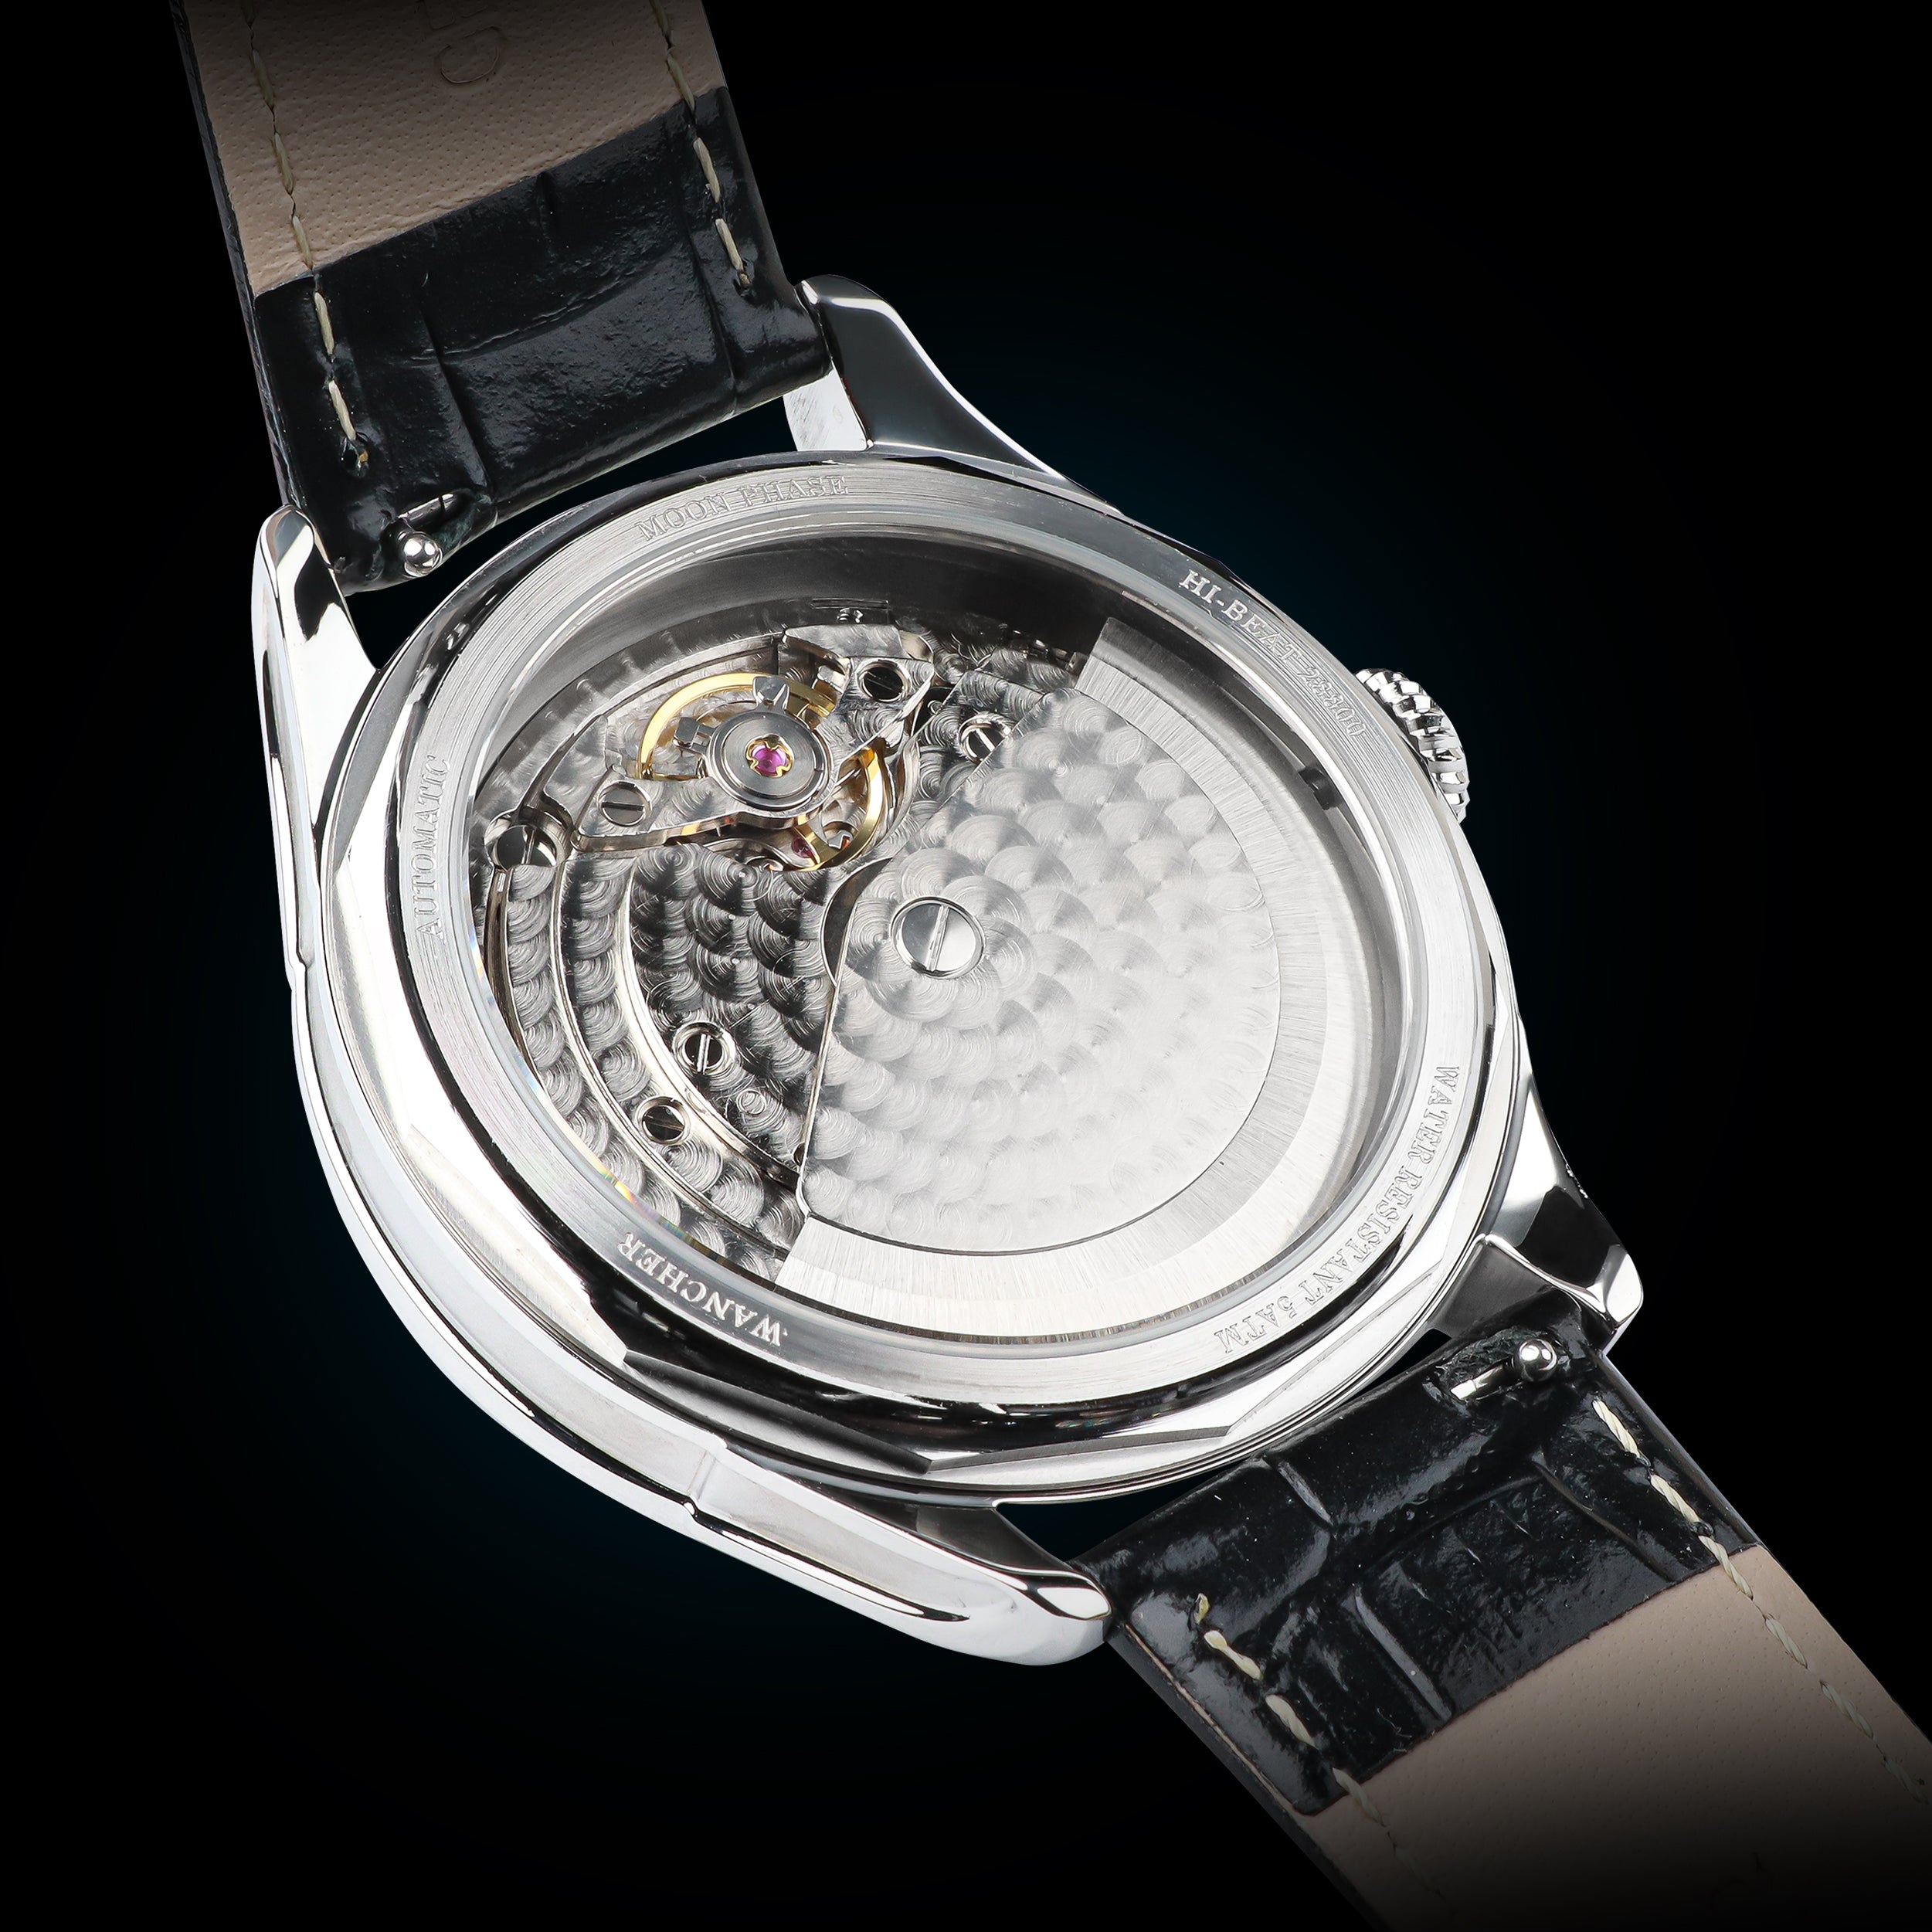 Discover the exceptional Hangzhou H7M01 Automatic movement showcased in the Dream Moonphase Kaguya watch, featuring a clear caseback for a glimpse of the intricate movement. This high-precision timepiece boasts an impressive accuracy of +/-15 seconds, operating at a high beat of 28,800 bph, and offering a reliable 48-hour power reserve. Embrace the perfect blend of artistry and precision in this captivating moonphase watch